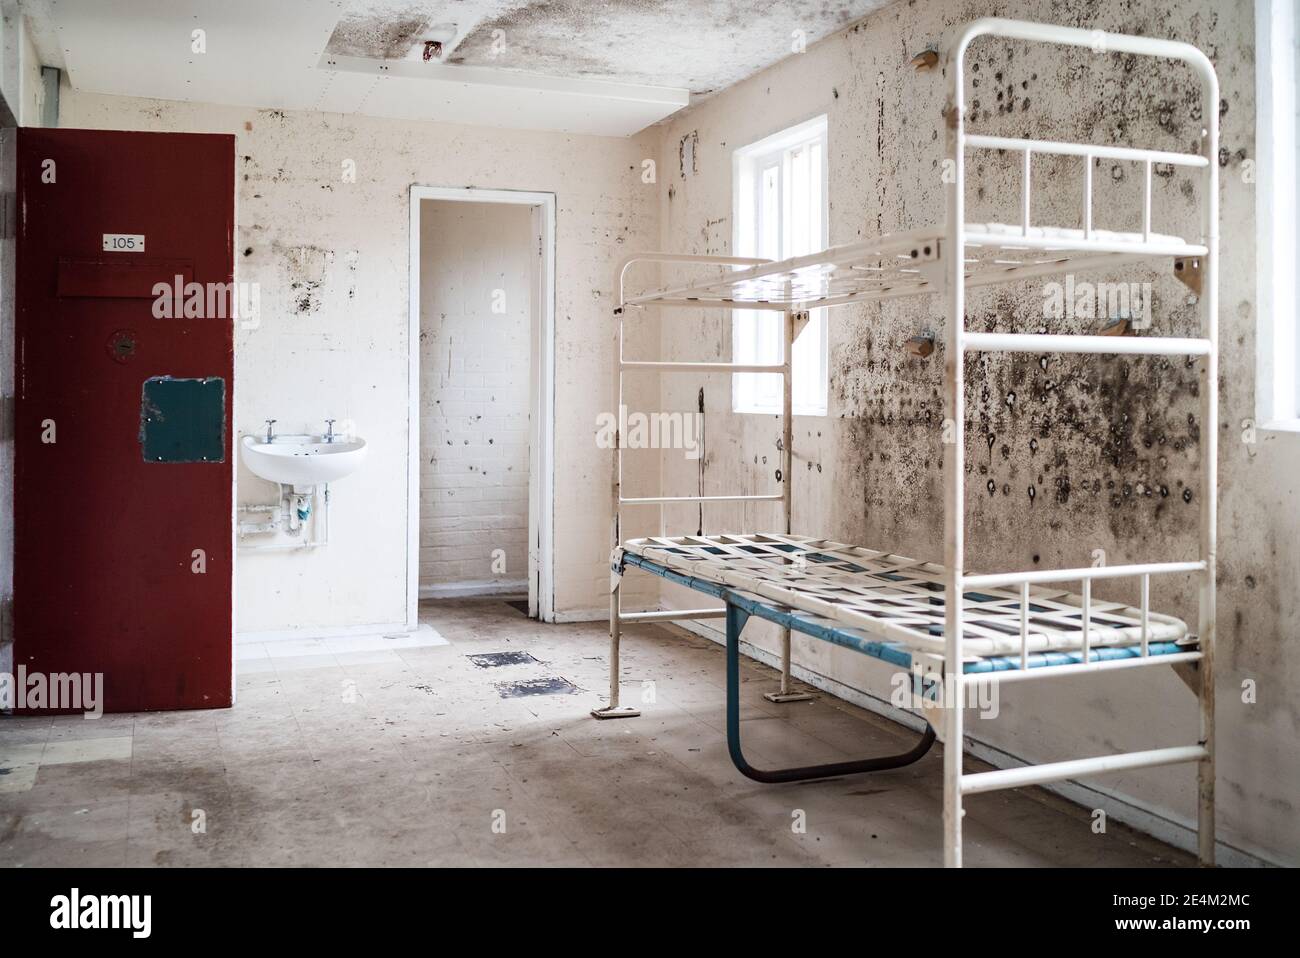 Prison cell block victorian British English jail house bunk bed room lock up high security room derelict old new category A B C custody mouldy bedroom Stock Photo